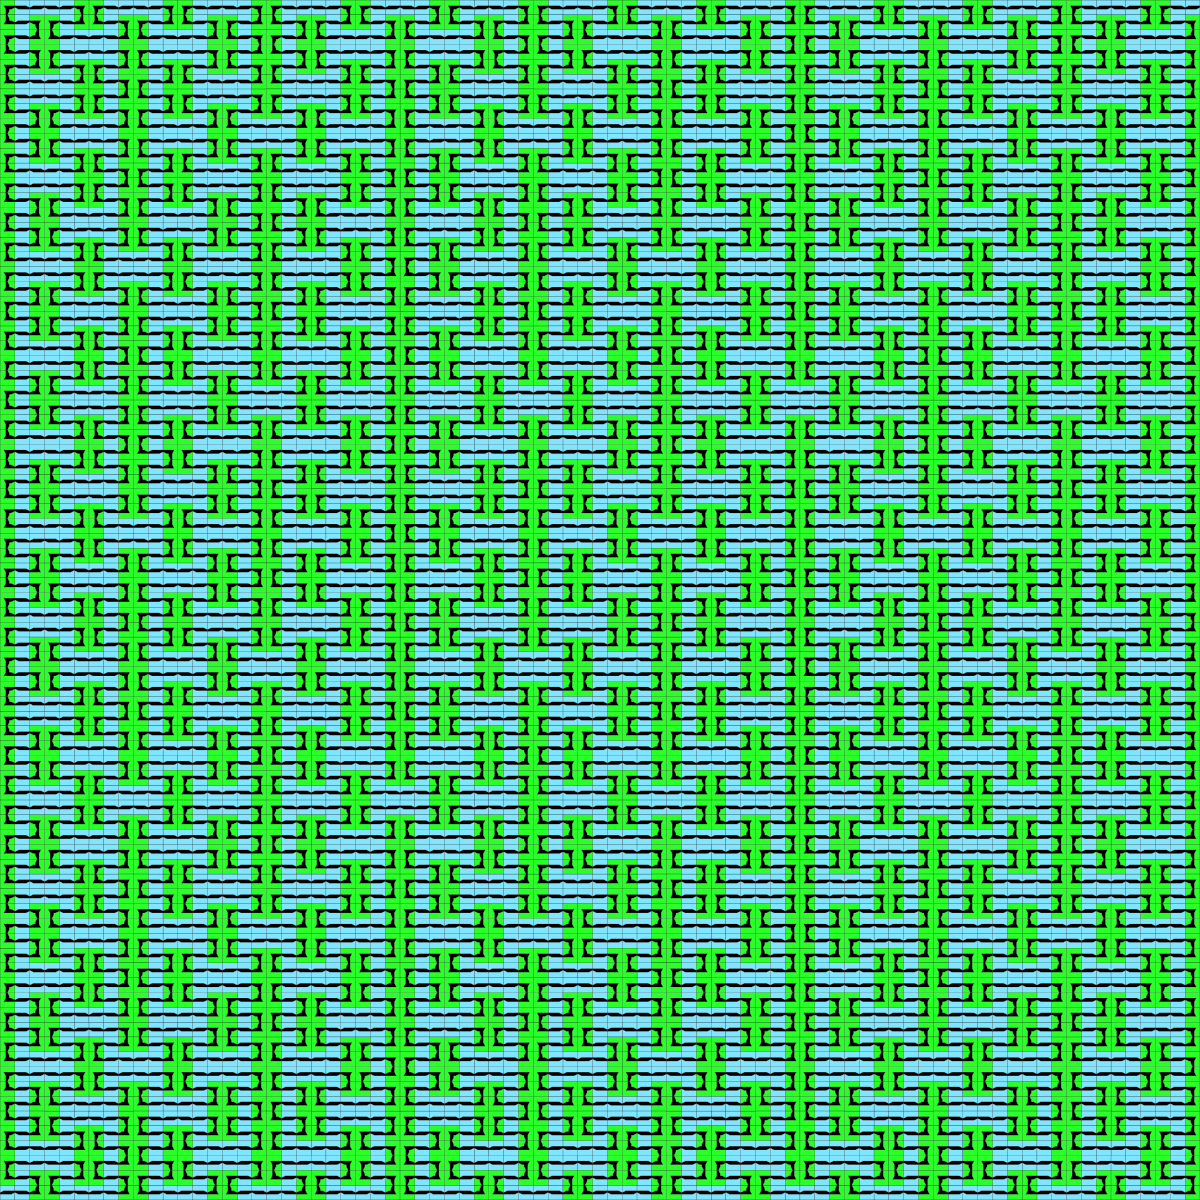 Patch Peano Curve Substitution Tiling